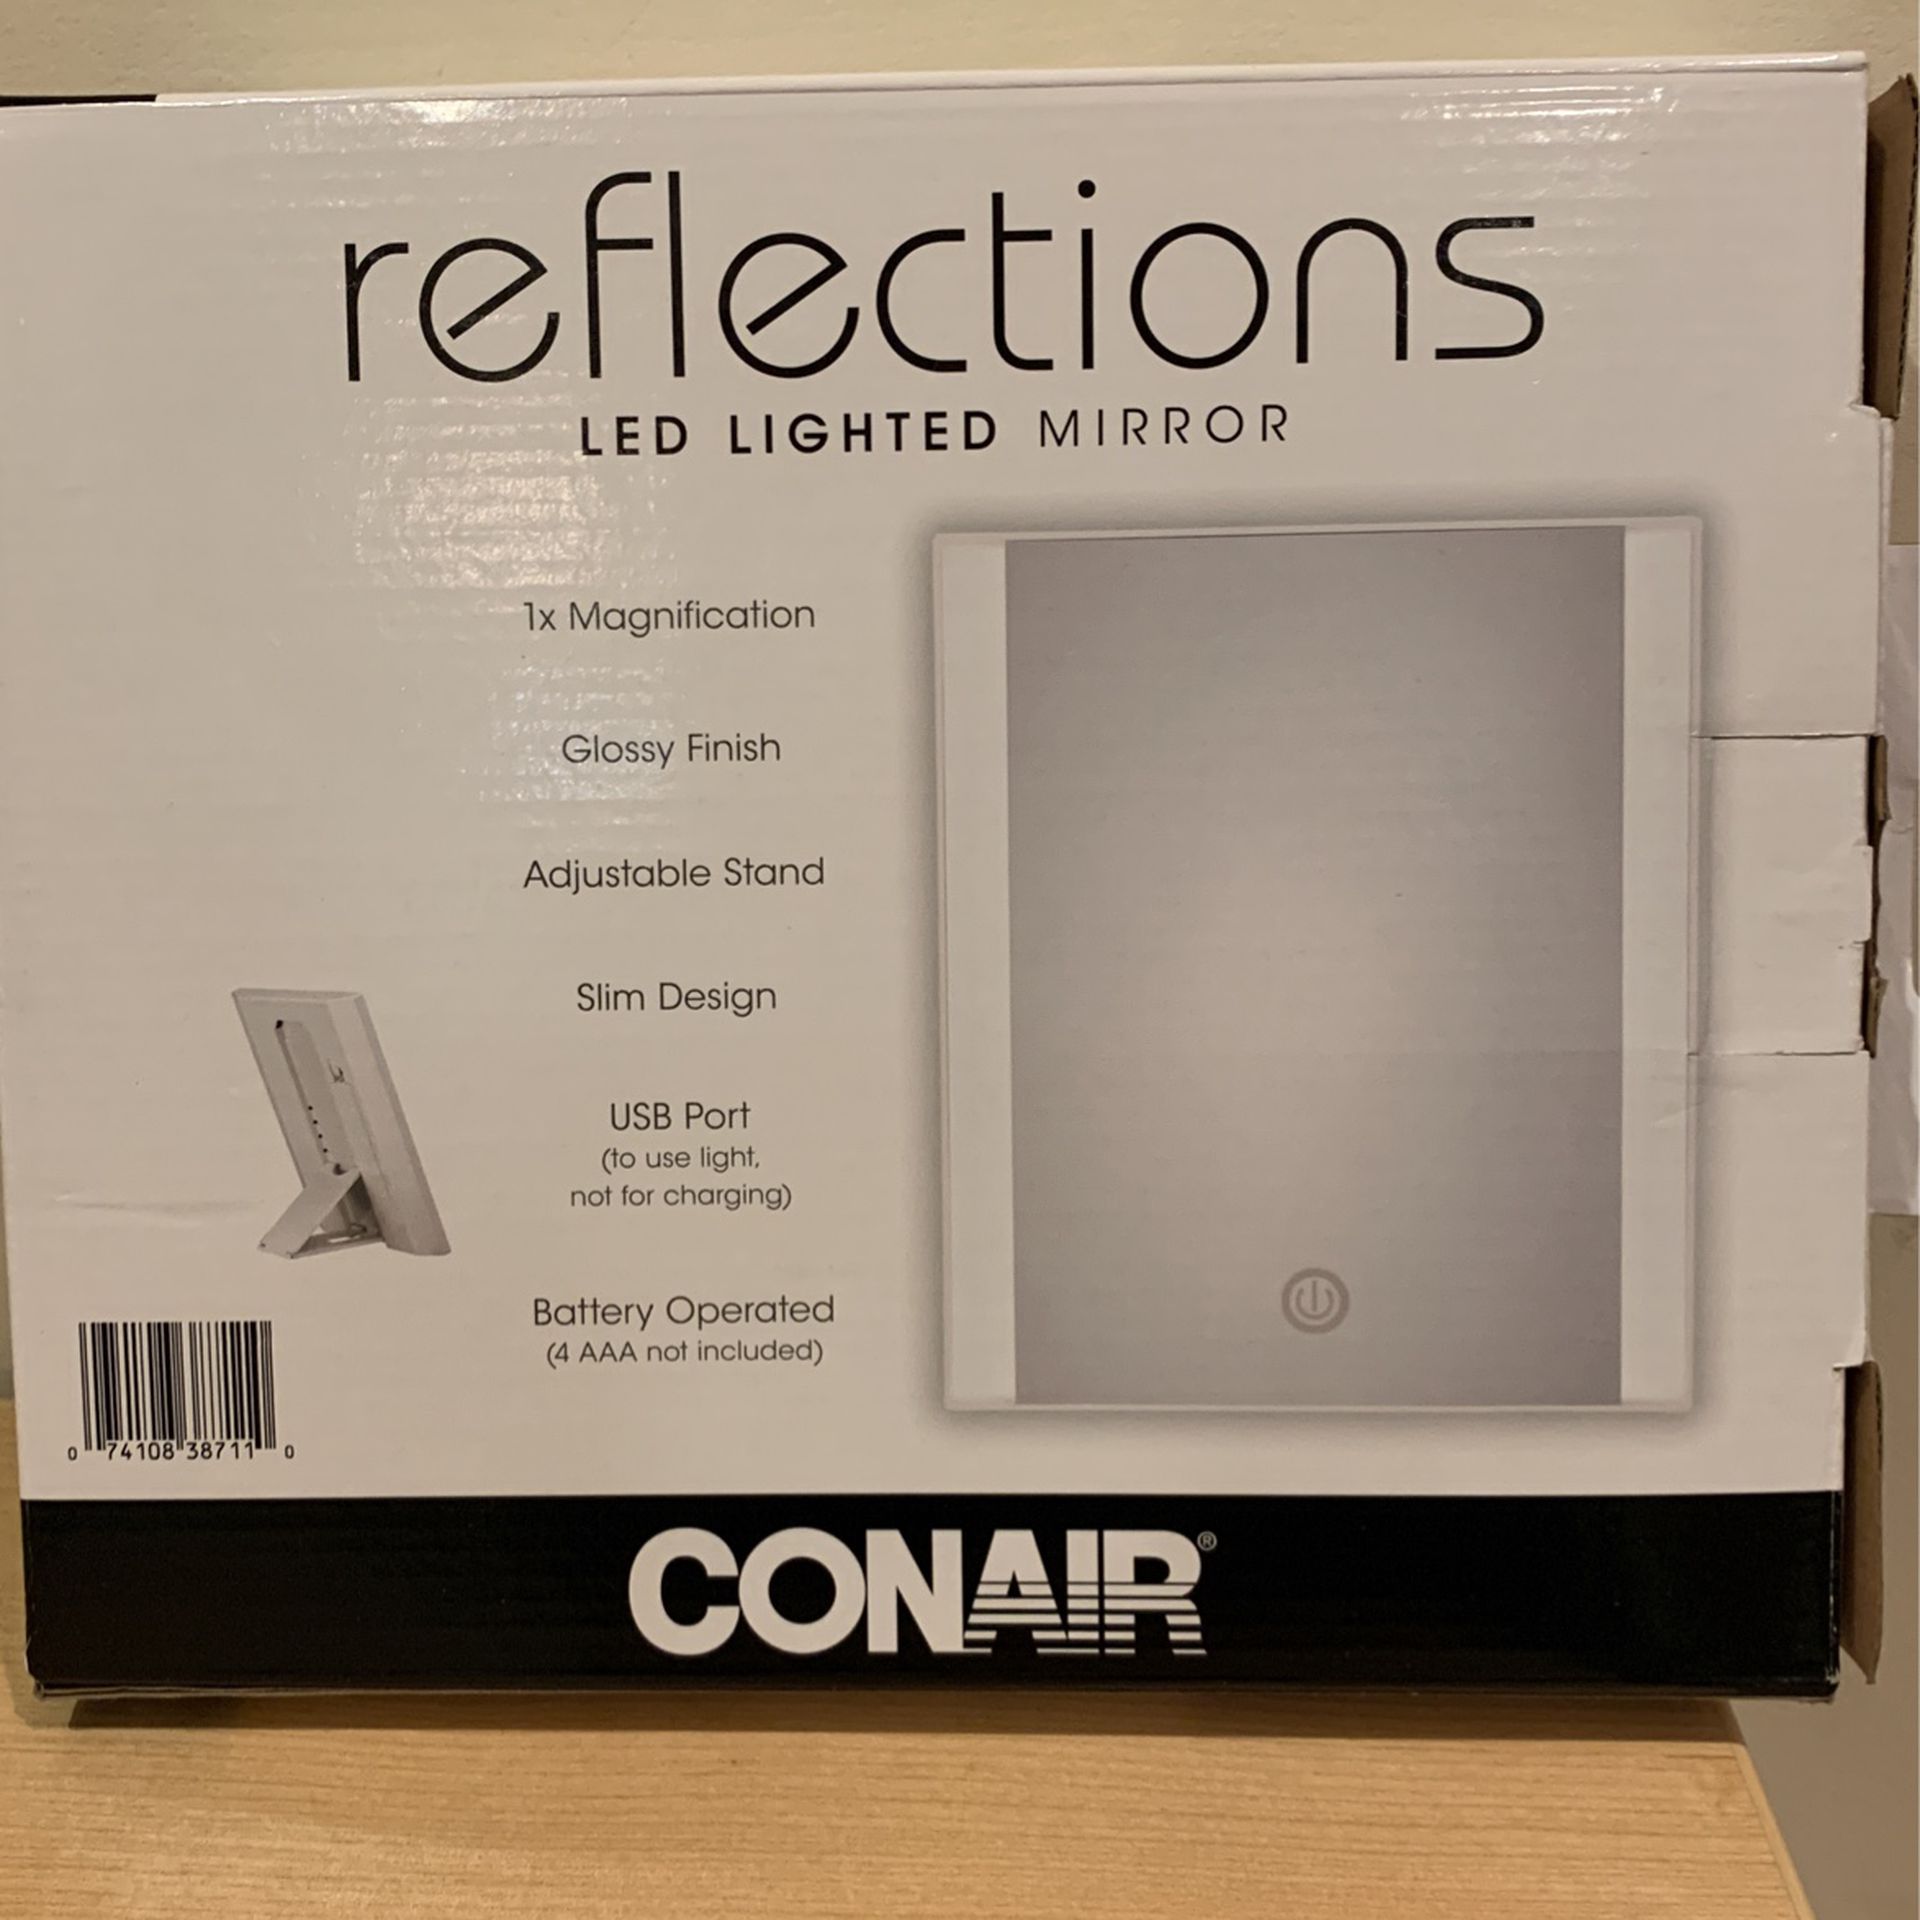 New in box Conair Reflections LED lighted makeup mirror